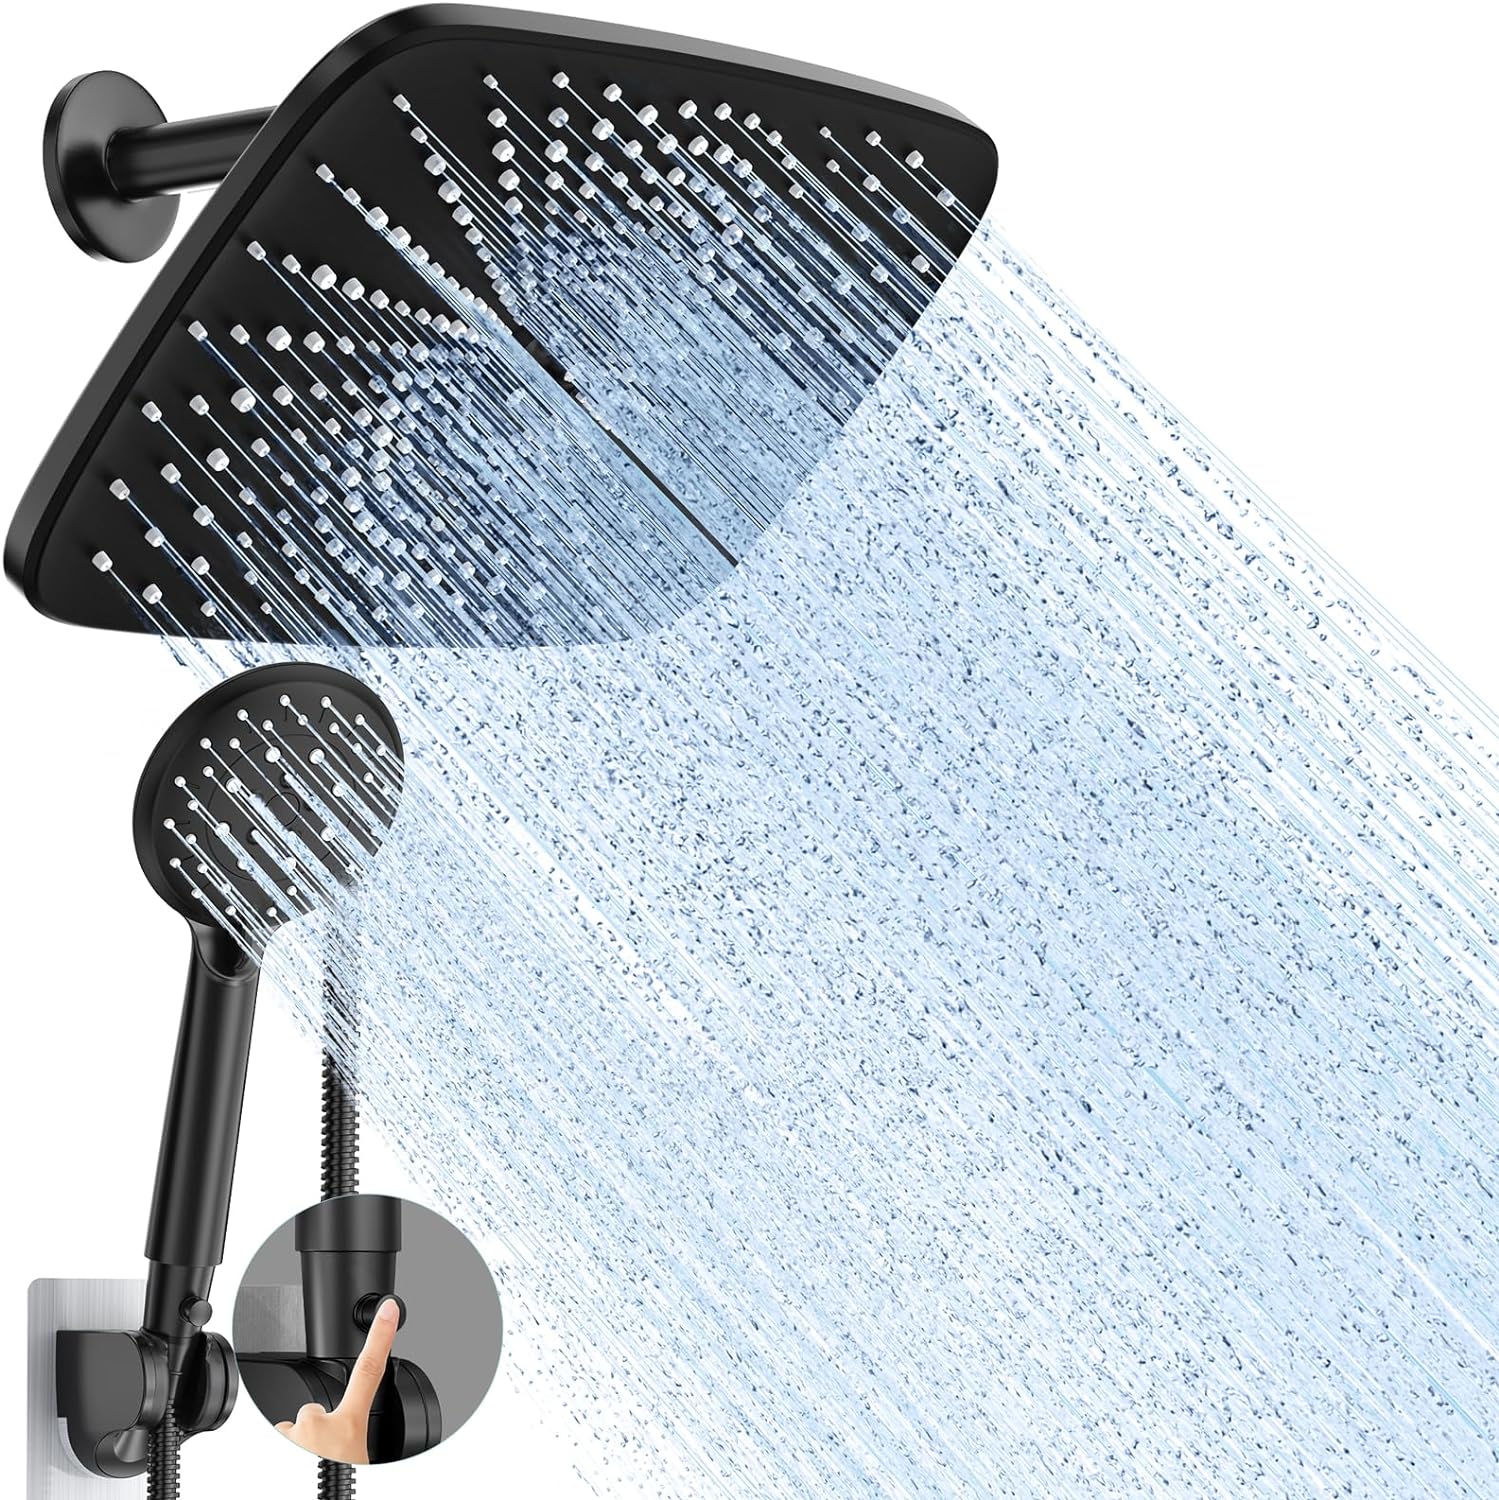 Veken 12 Inch High Pressure Rain Shower Head -Shower Heads with 5 Modes Handheld Spray Combo- Wide RainFall shower with 70 Hose - Adjustable Dual Showerhead with Anti-Clog Nozzles- Matte Black